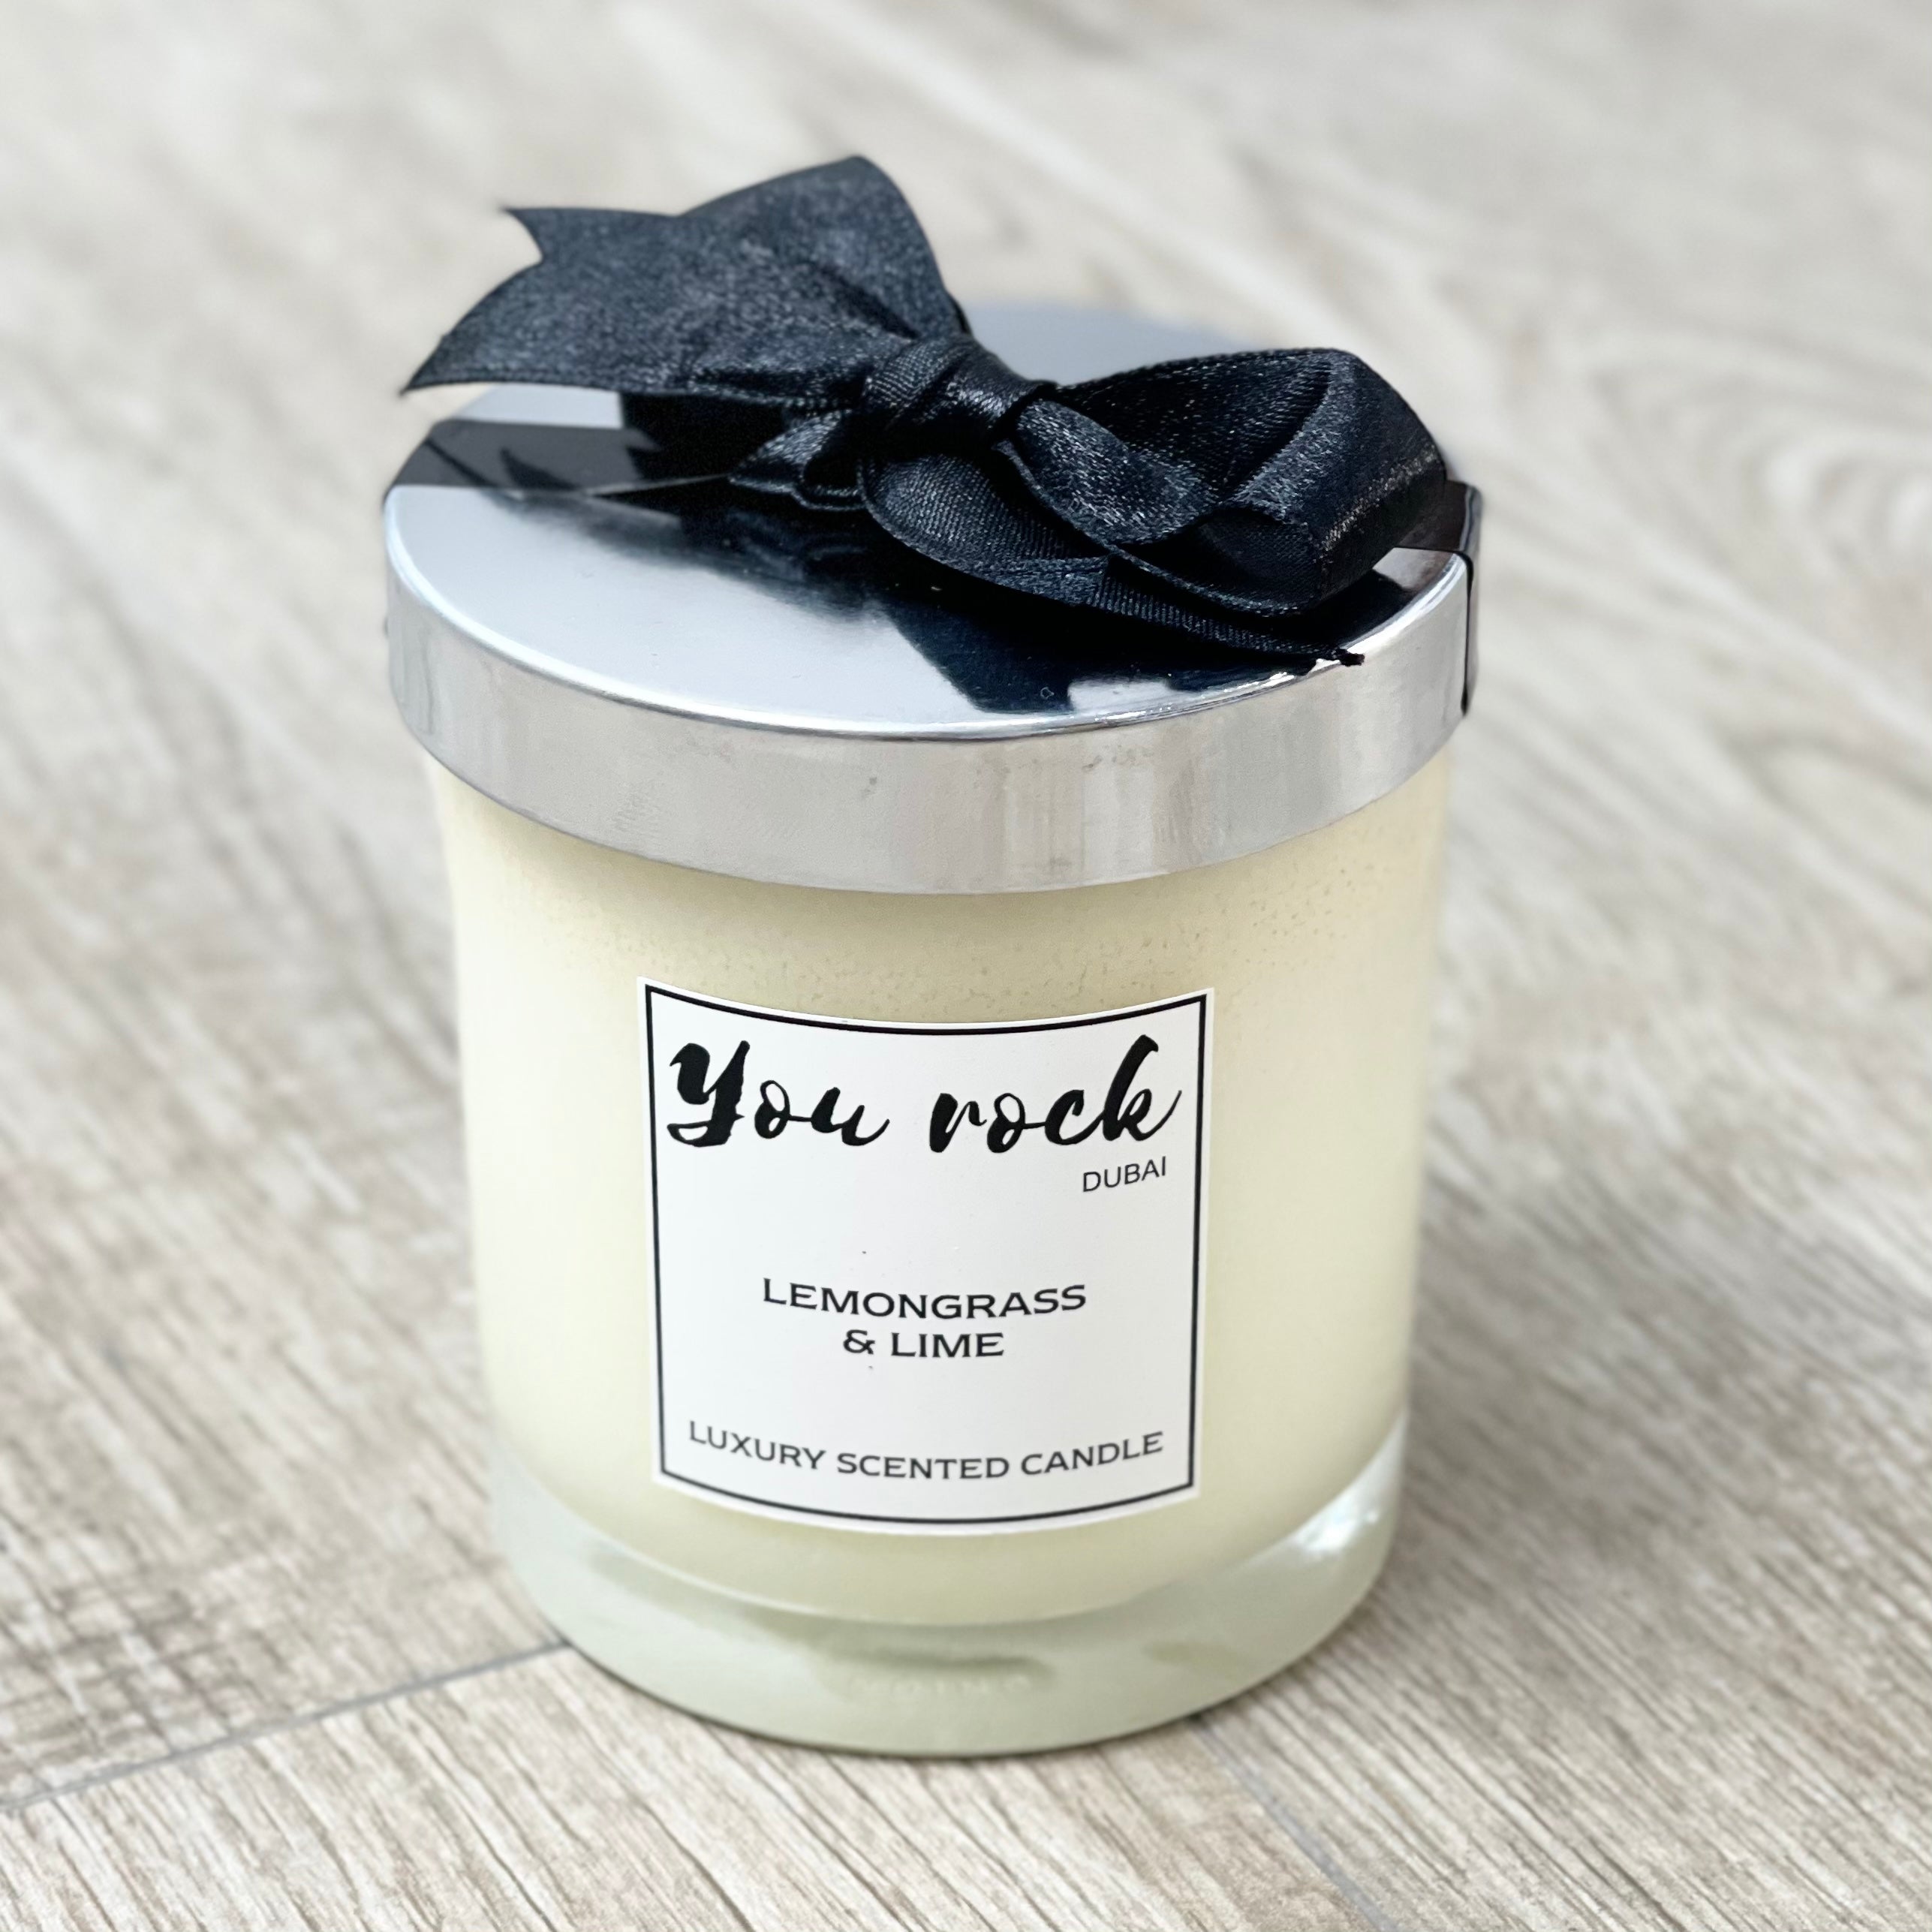 Natural Soy Wax Scented Candle - Lemongrass & Lime Fragrance 